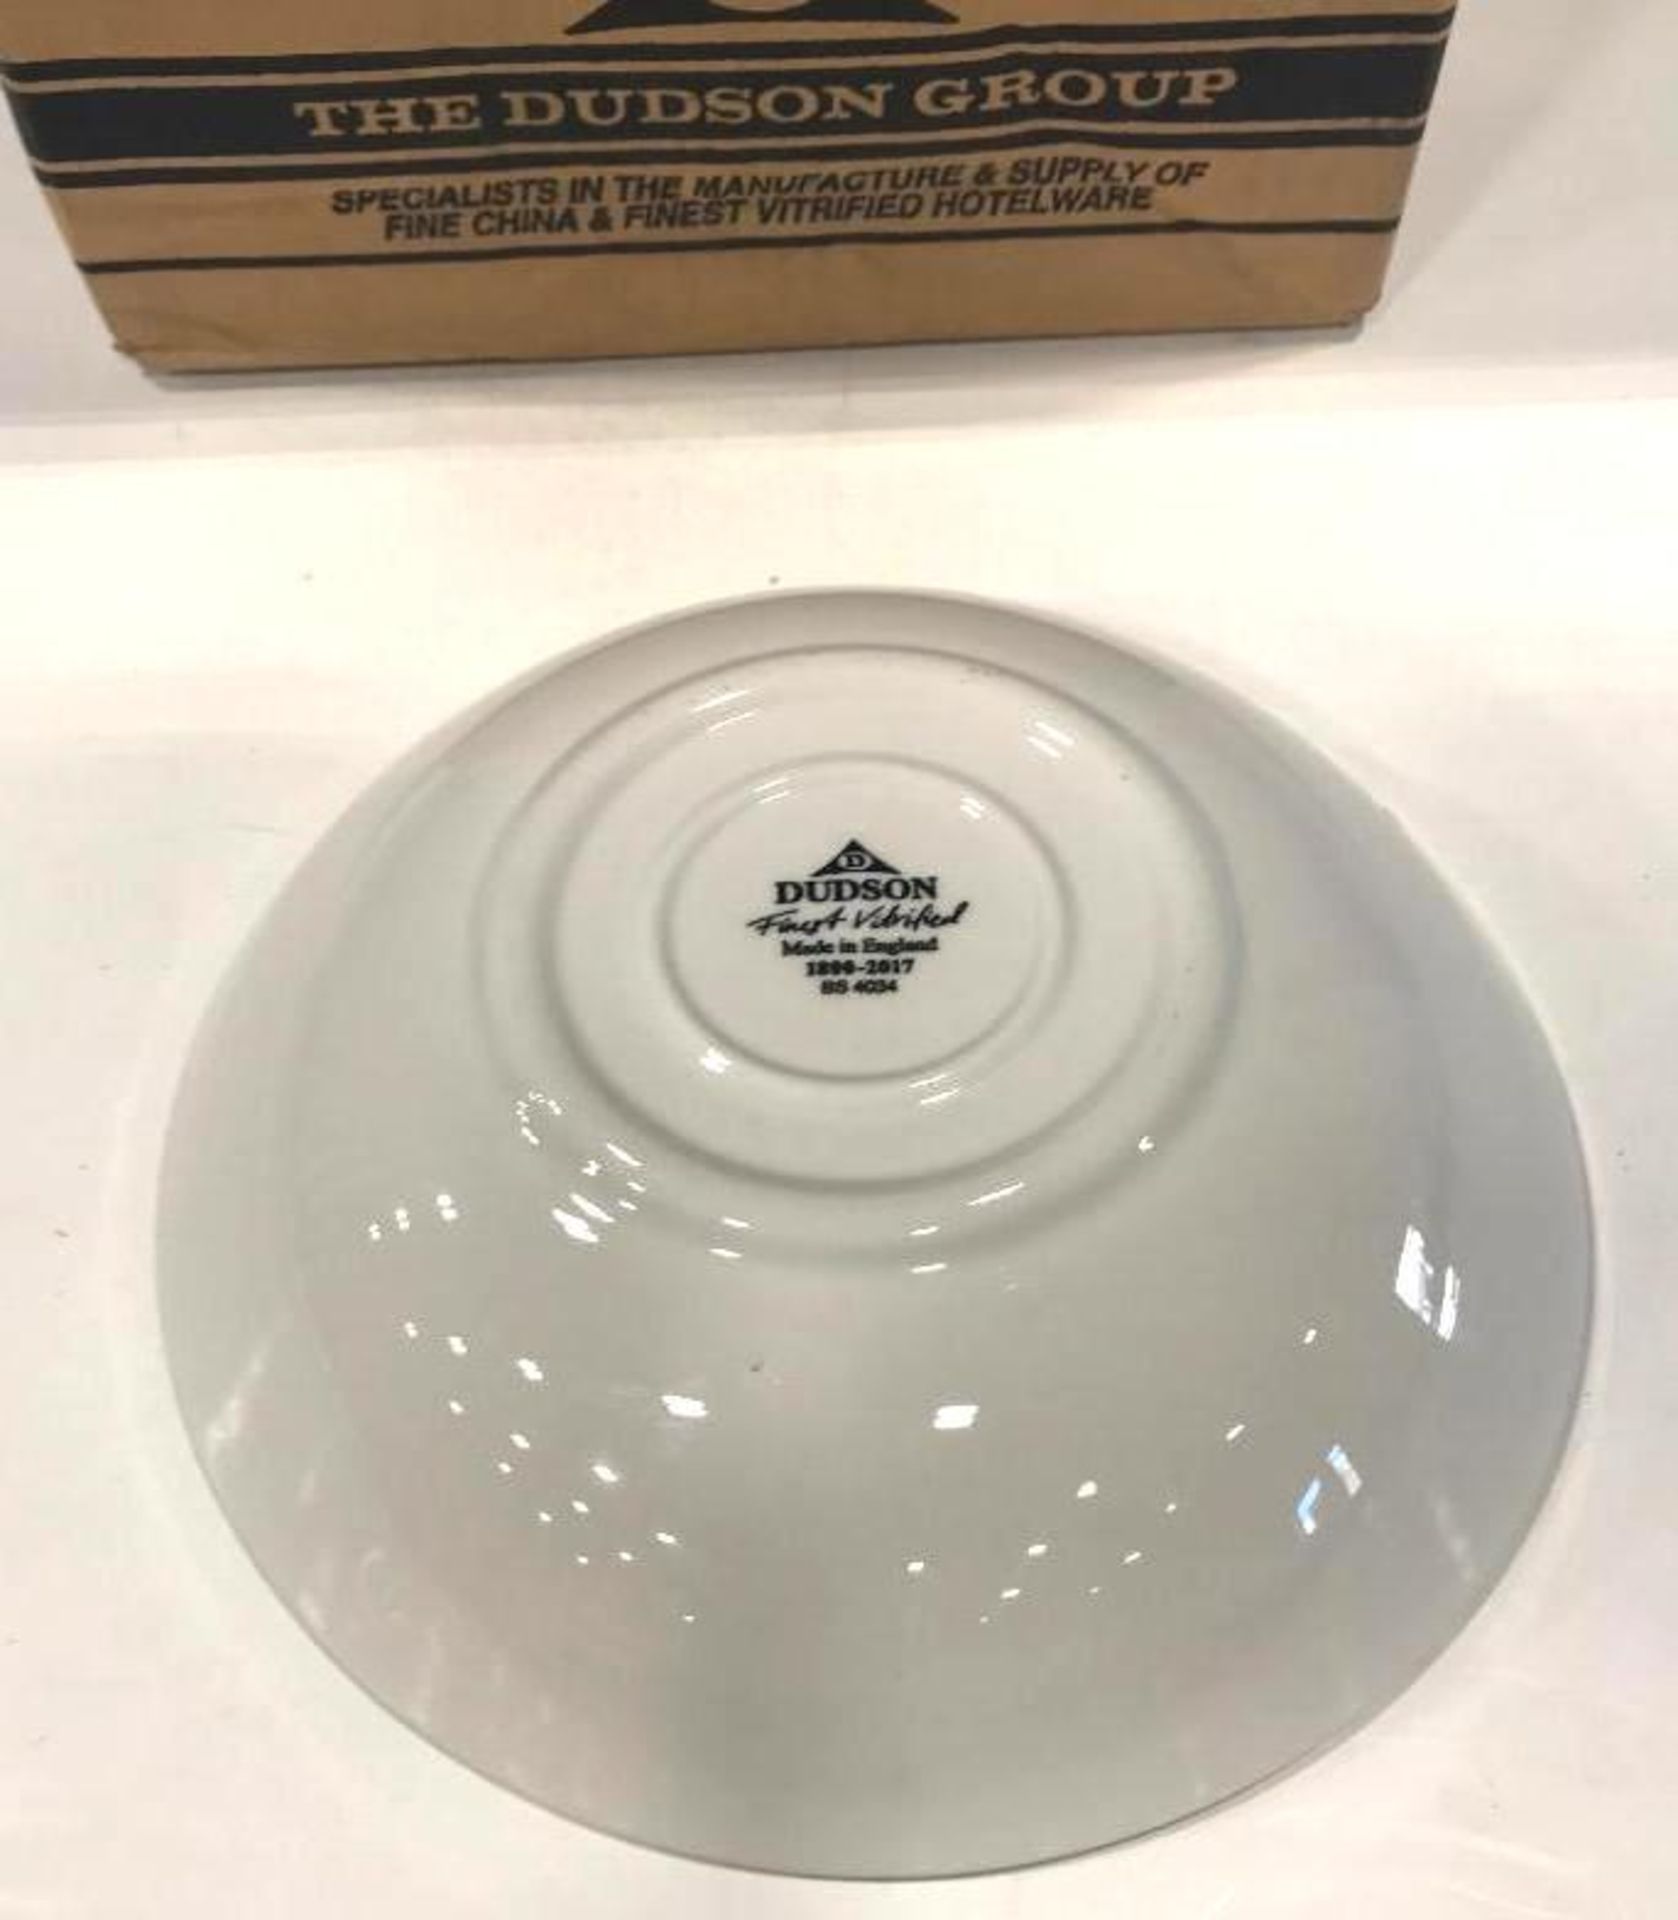 DUDSON CONCRETE CHEF'S BOWL 8" - 12/CASE, MADE IN ENGLAND - Image 3 of 5